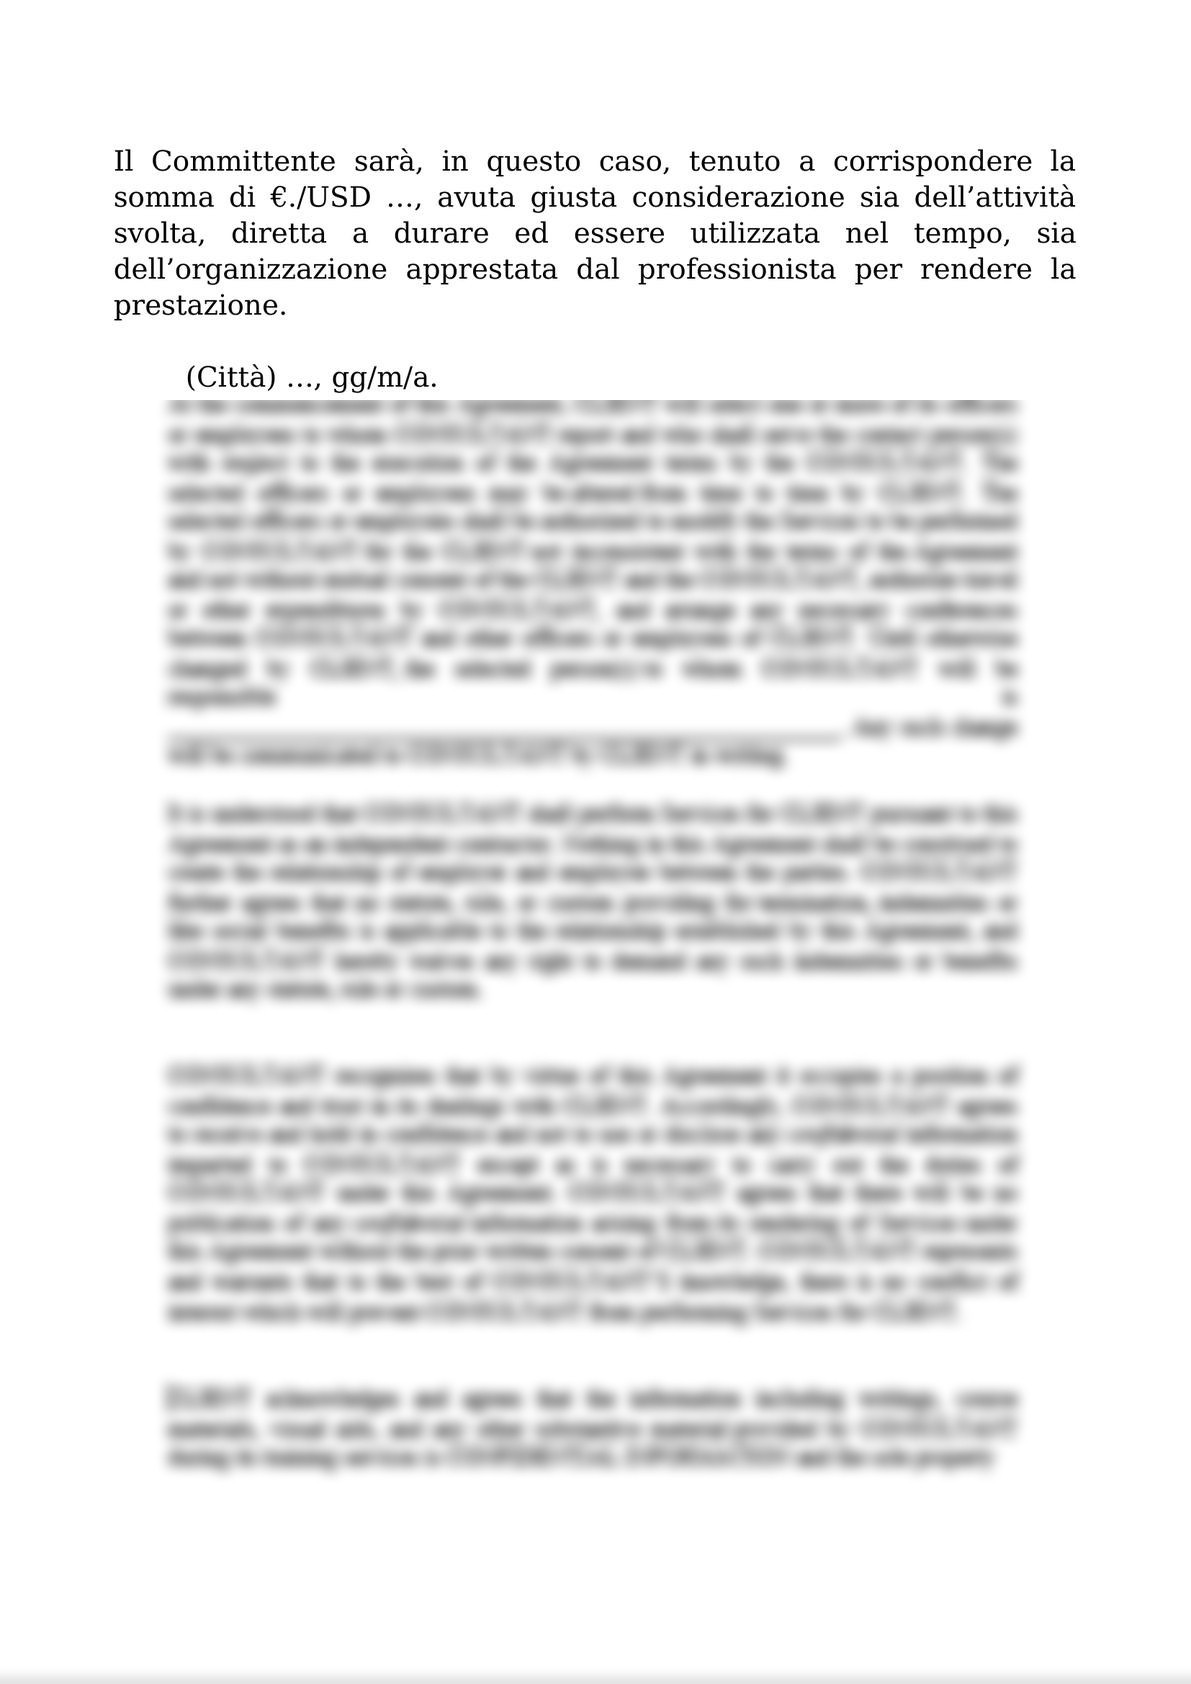 INTELLECTUAL WORK AGREEMENT FOR OUT-OF-COURT ACTIVITIES AND ATTACHMENTS 1 (PRIVACY); 2 (ANTI-MONEY LAUNDERING); AND 3 FEE QUOTE / CONTRATTO D’OPERA INTELLETTUALE STRAGIUDIZIALE-6